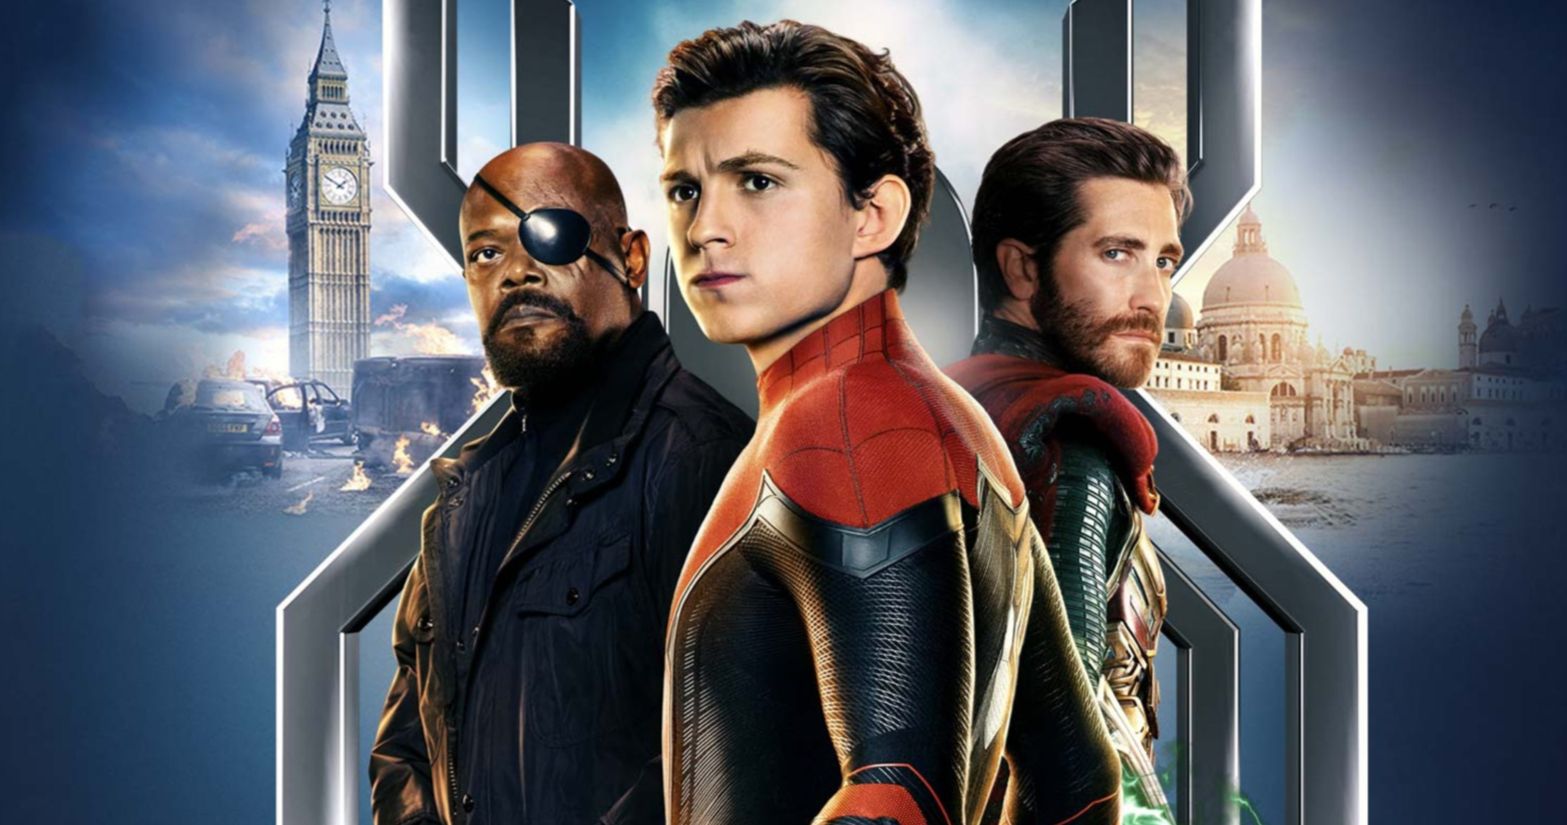 Spider-Man: Far from Home Owns the Weekend with $93M, Earns $580M Worldwide So Far